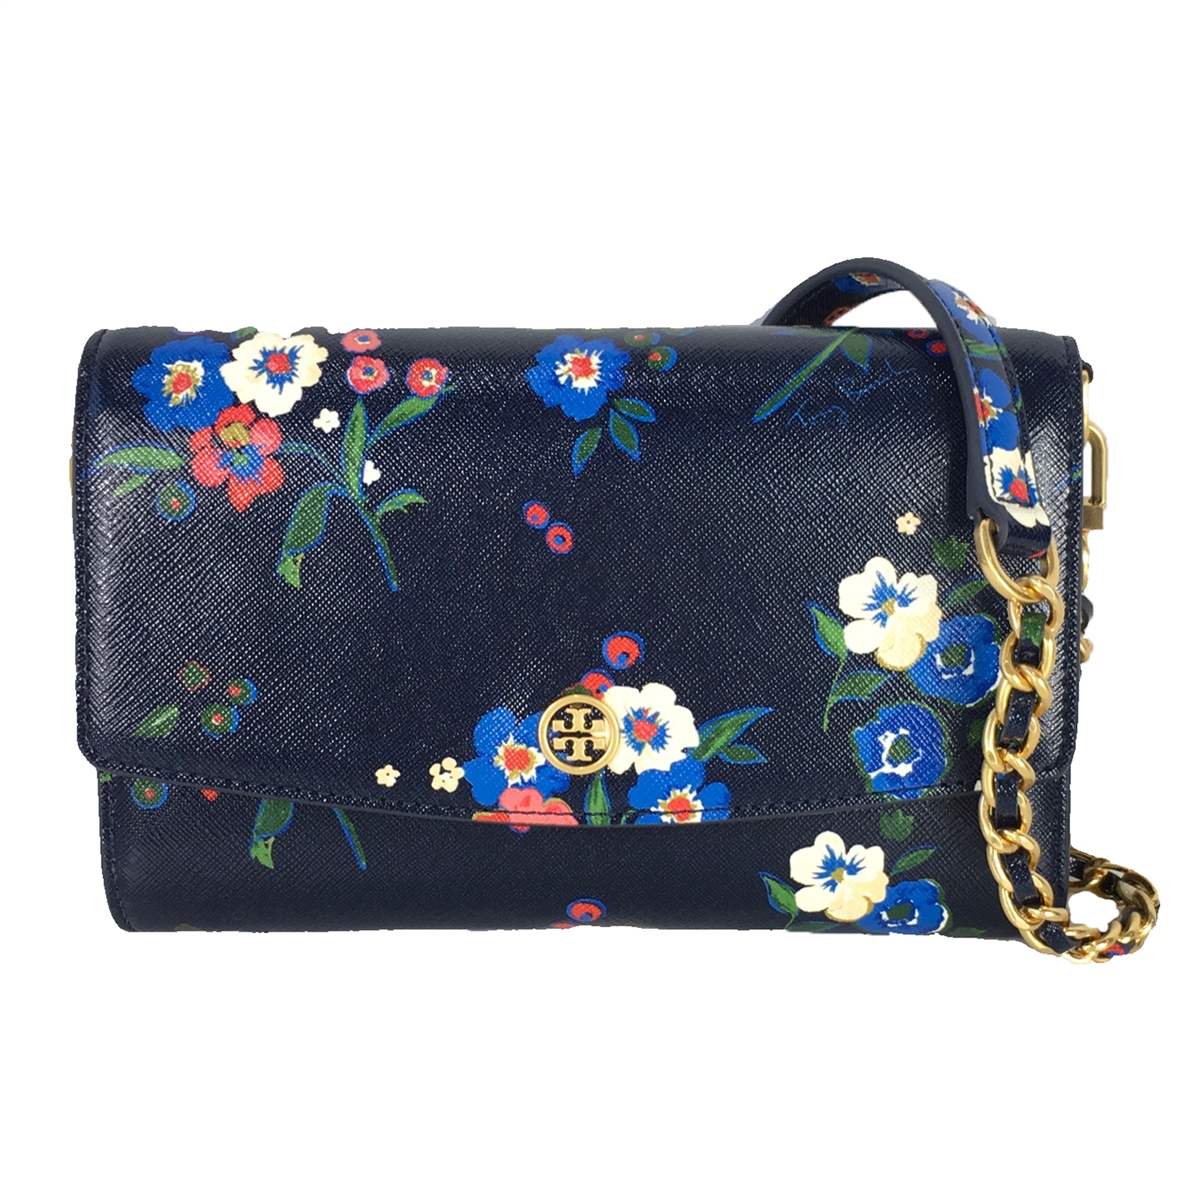 Tory Burch, Bags, Tory Burch Embroidered Floral Combo Crossbody Purse